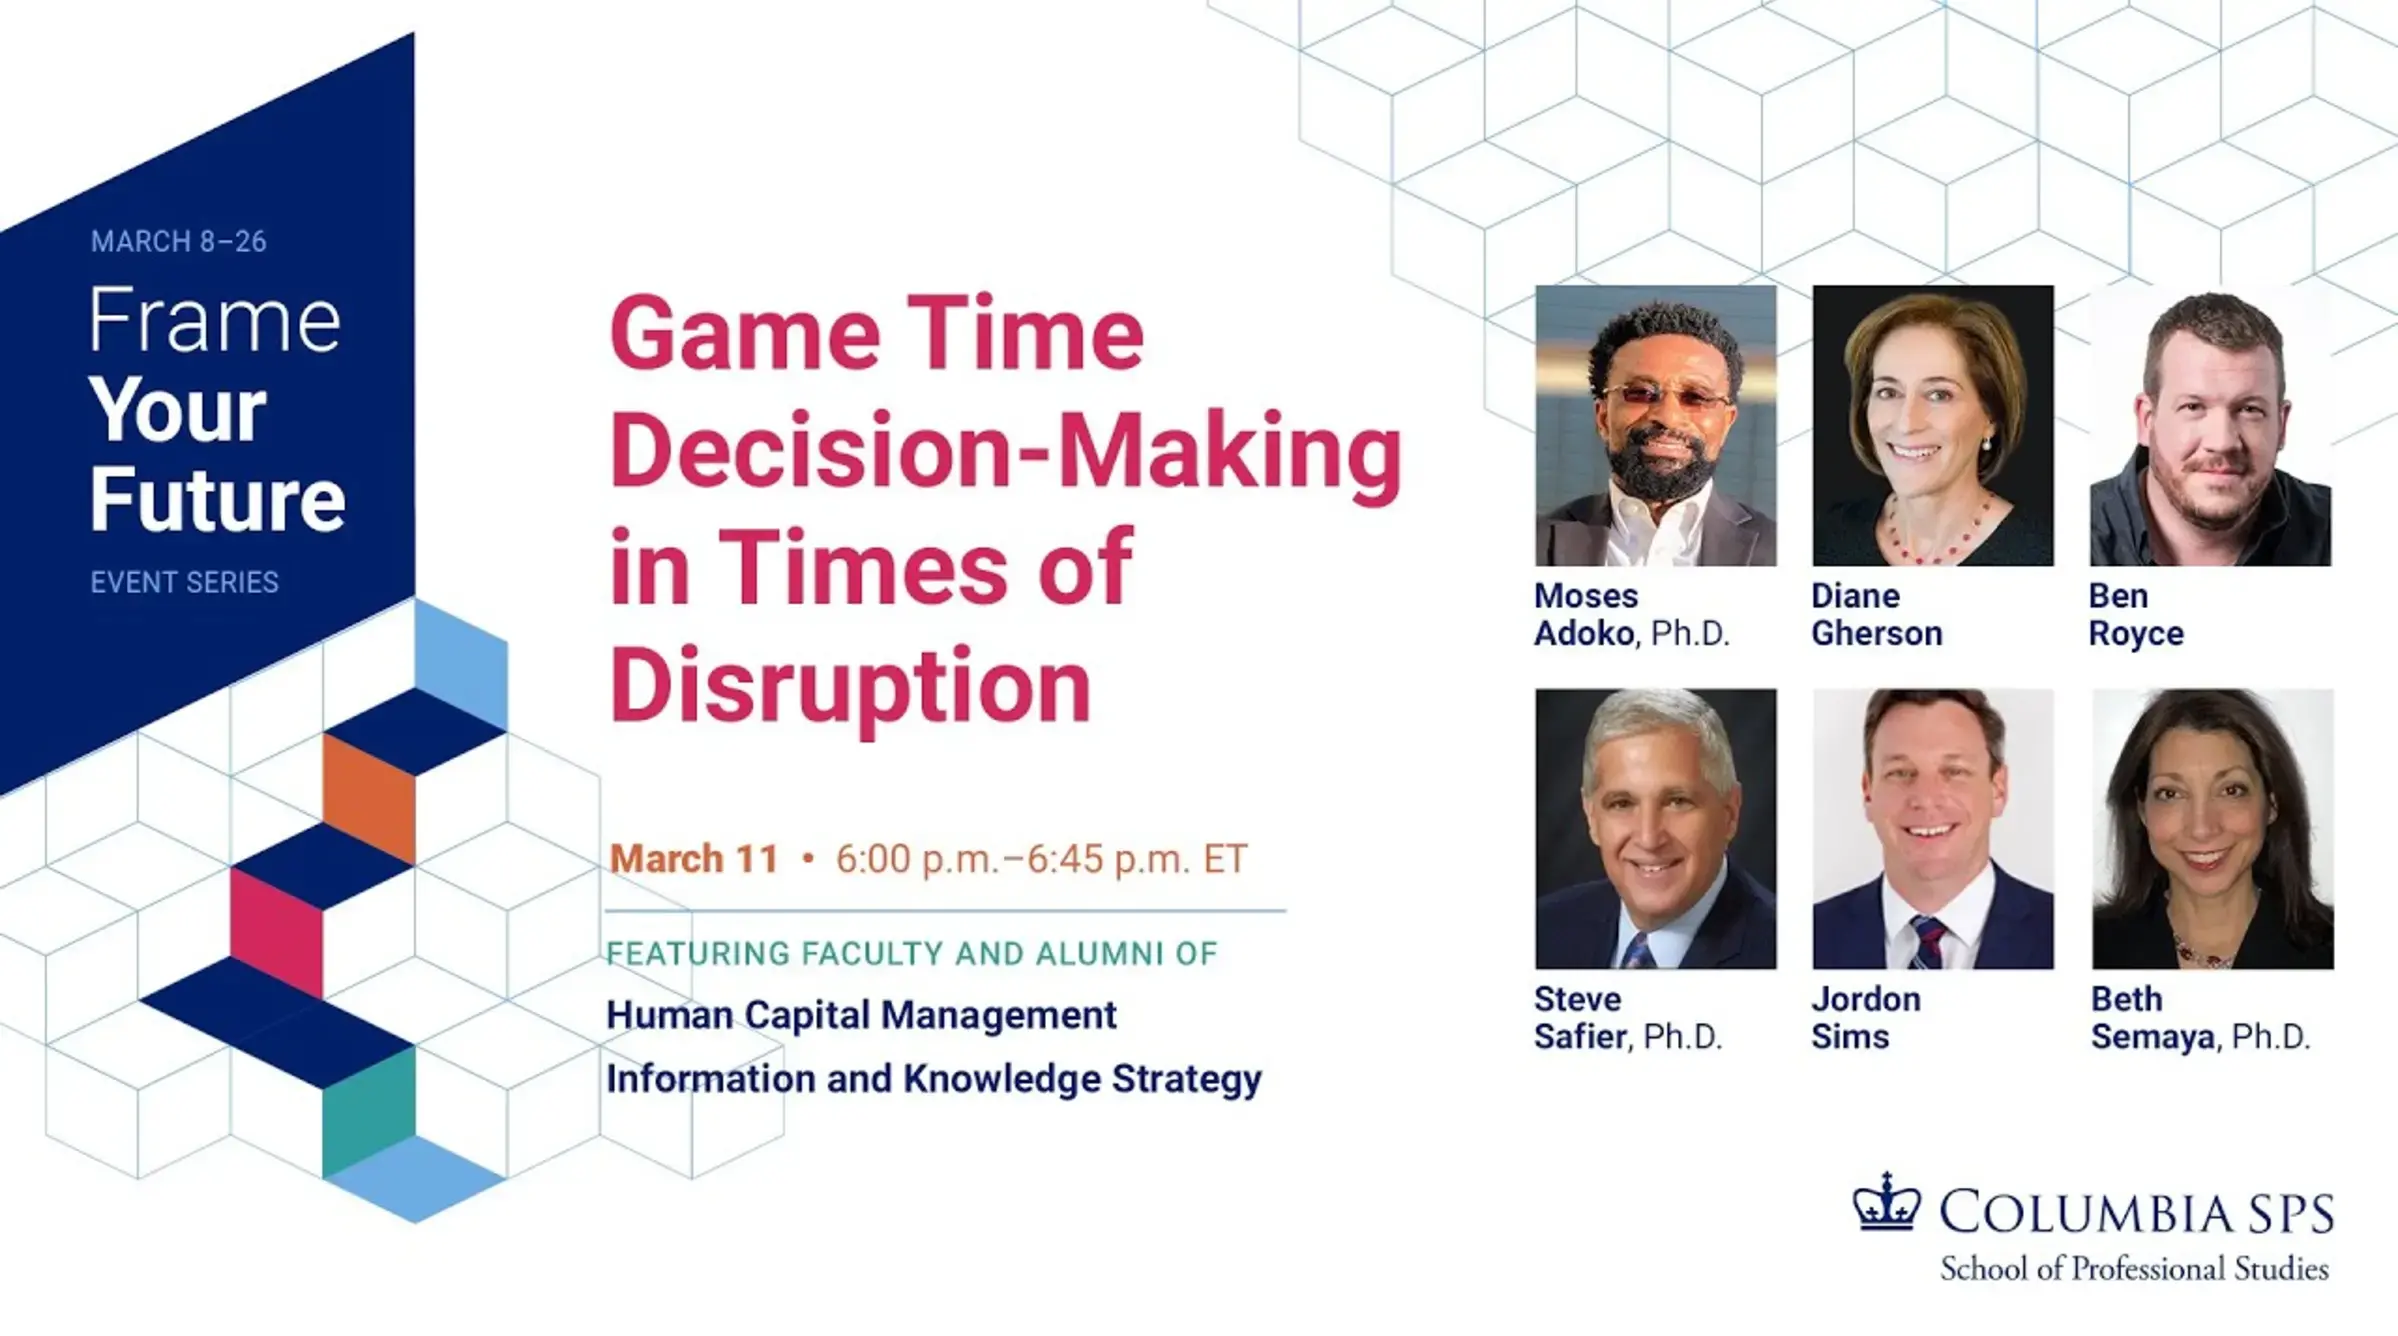 Game Time Decision-Making in Times of Disruption